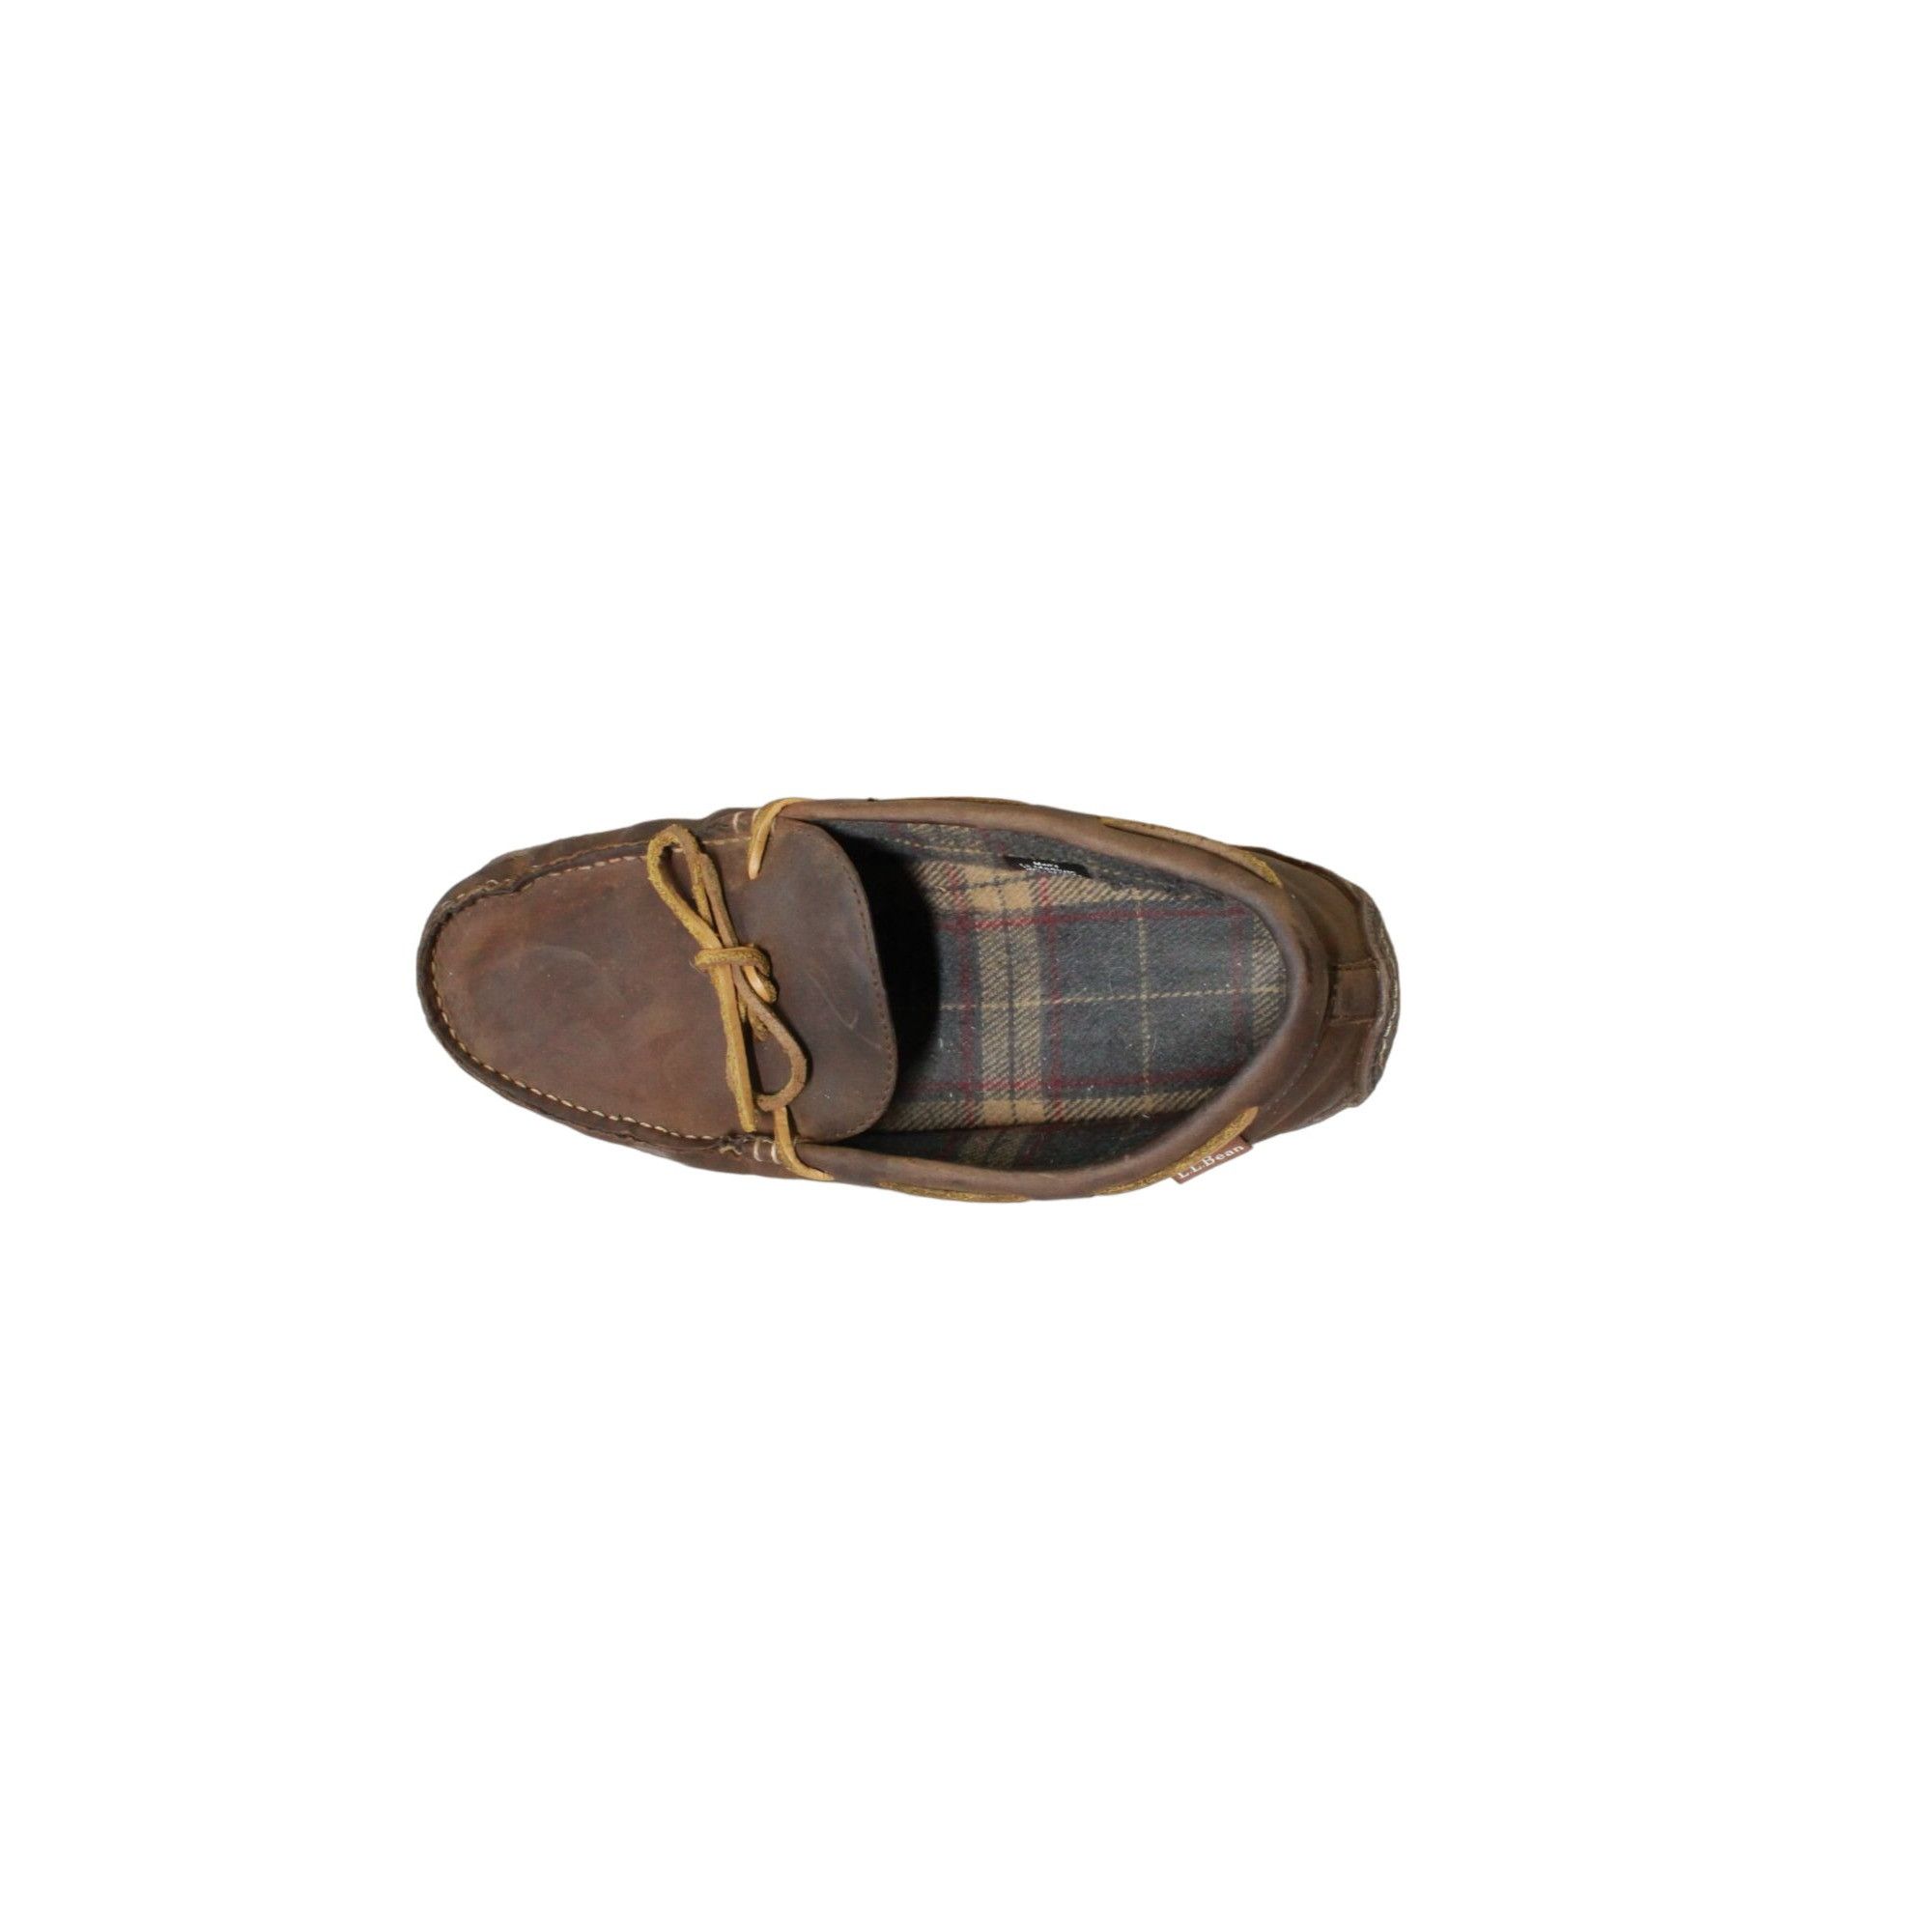 L.L. Bean LL Bean Men's Brown Leather Flannel-Lined Handsewn Slippers Size US 12 / EU 45 - 7 Thumbnail